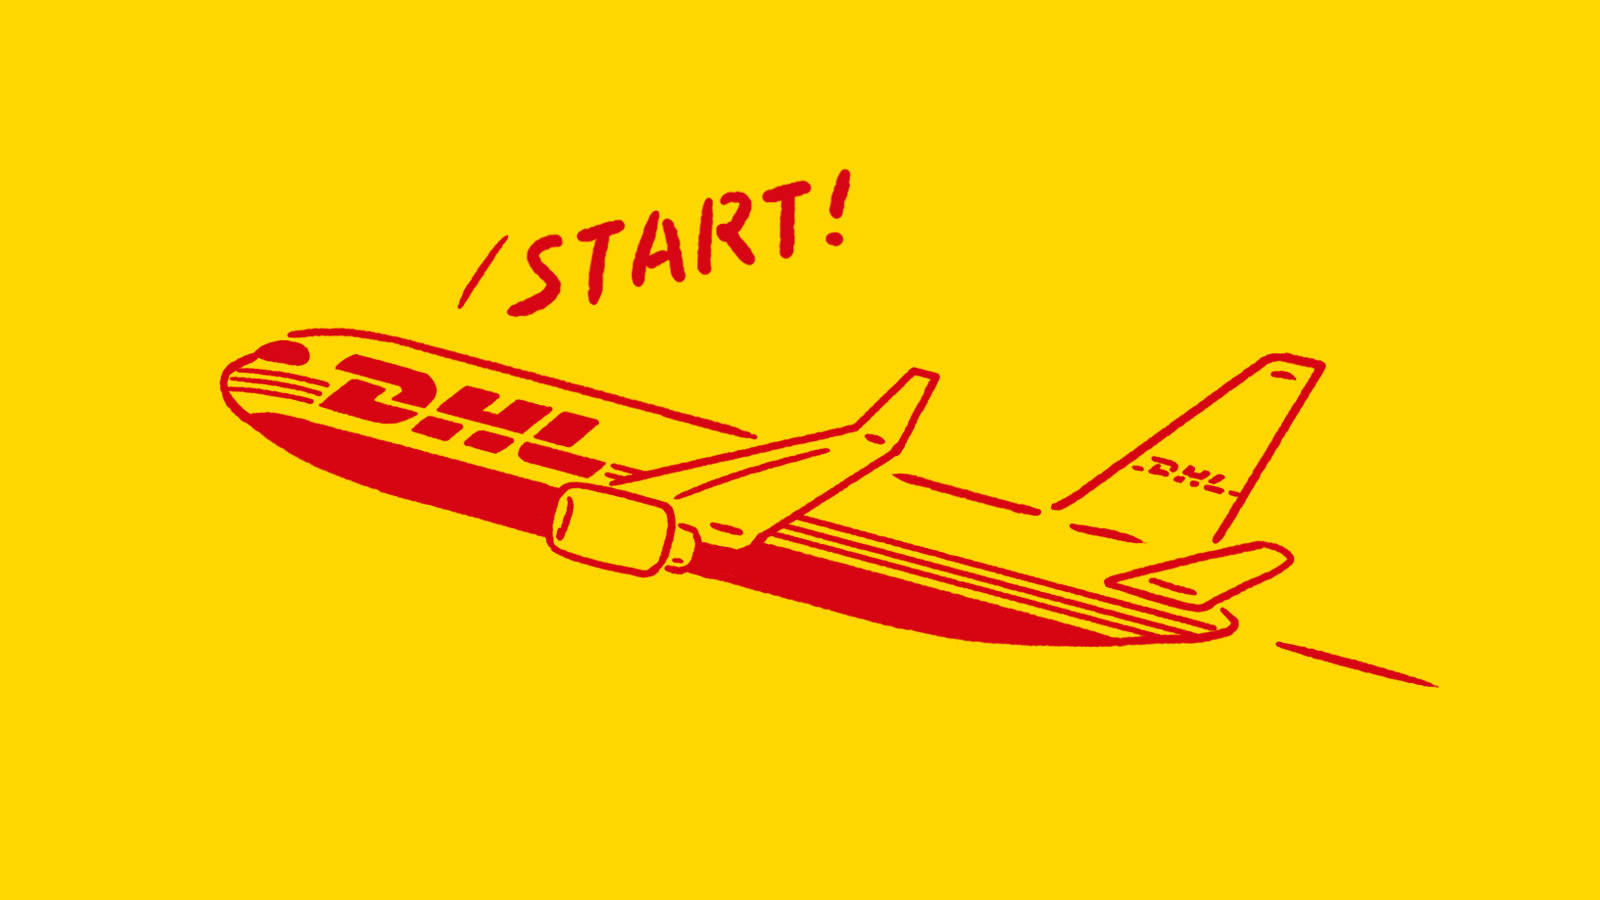 DHL Graphic Drawing Wallpaper